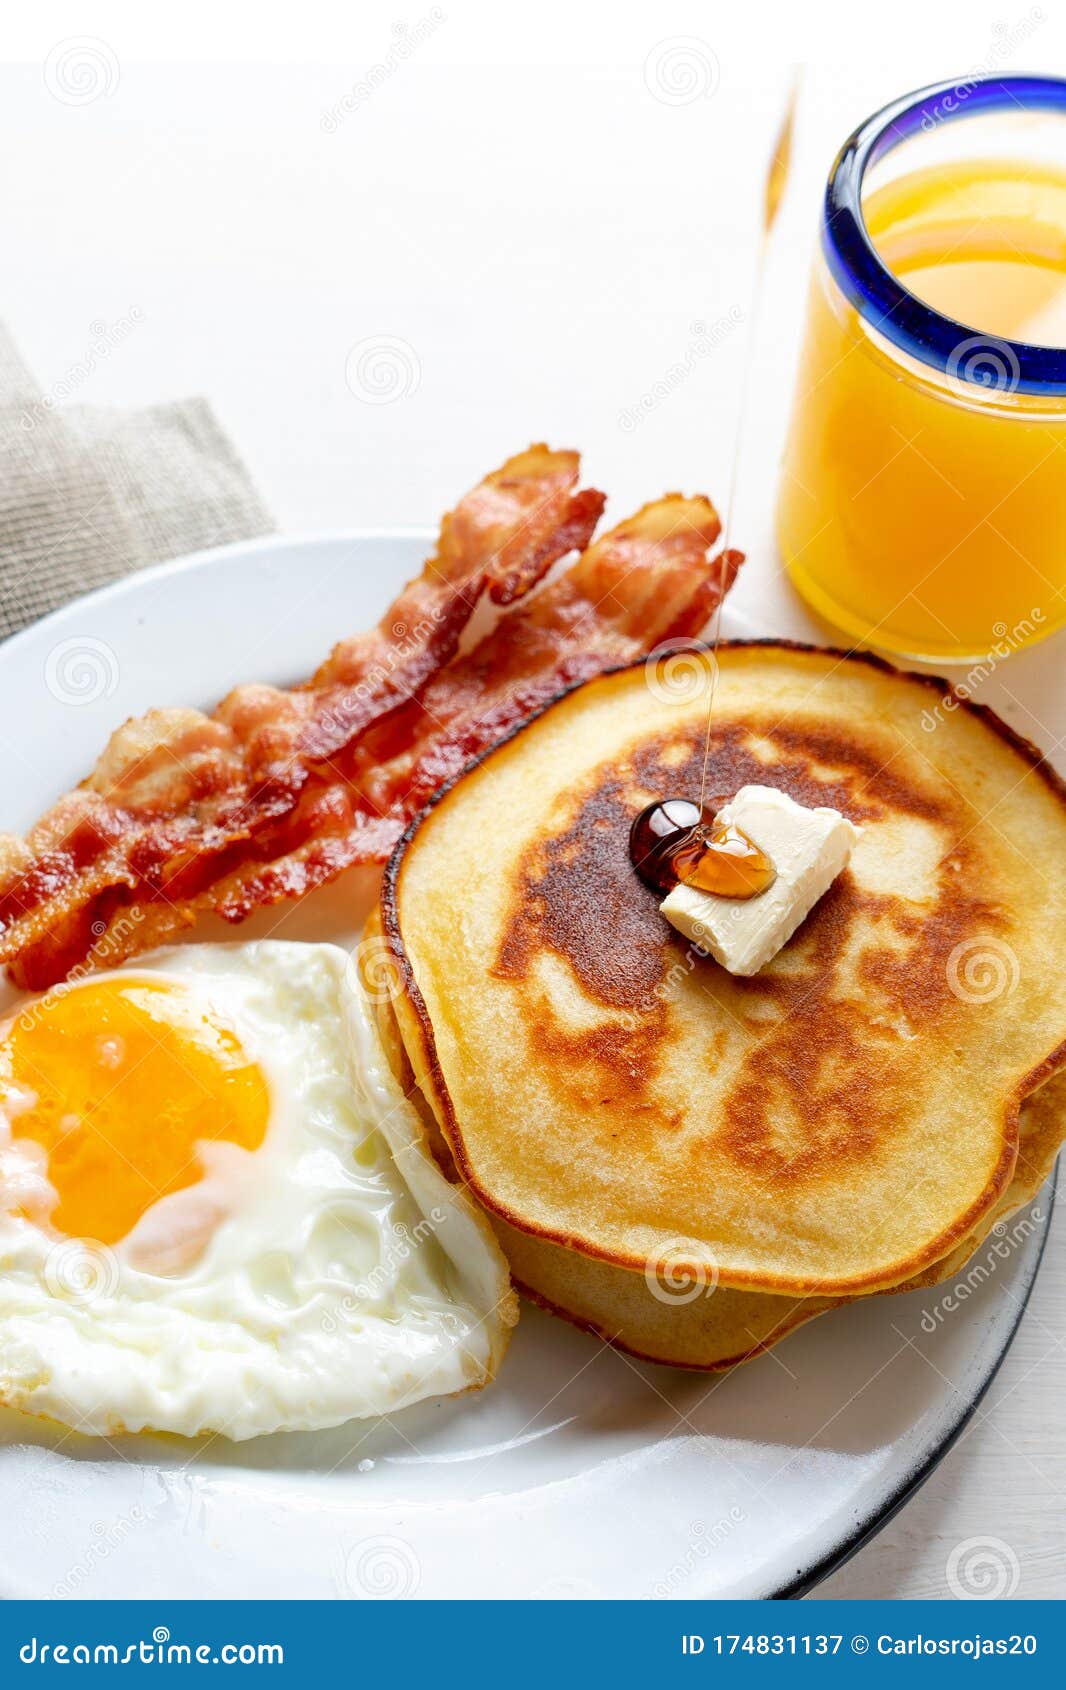 American Breakfast with Egg, Pancake and Bacon Stock Image - Image of ...